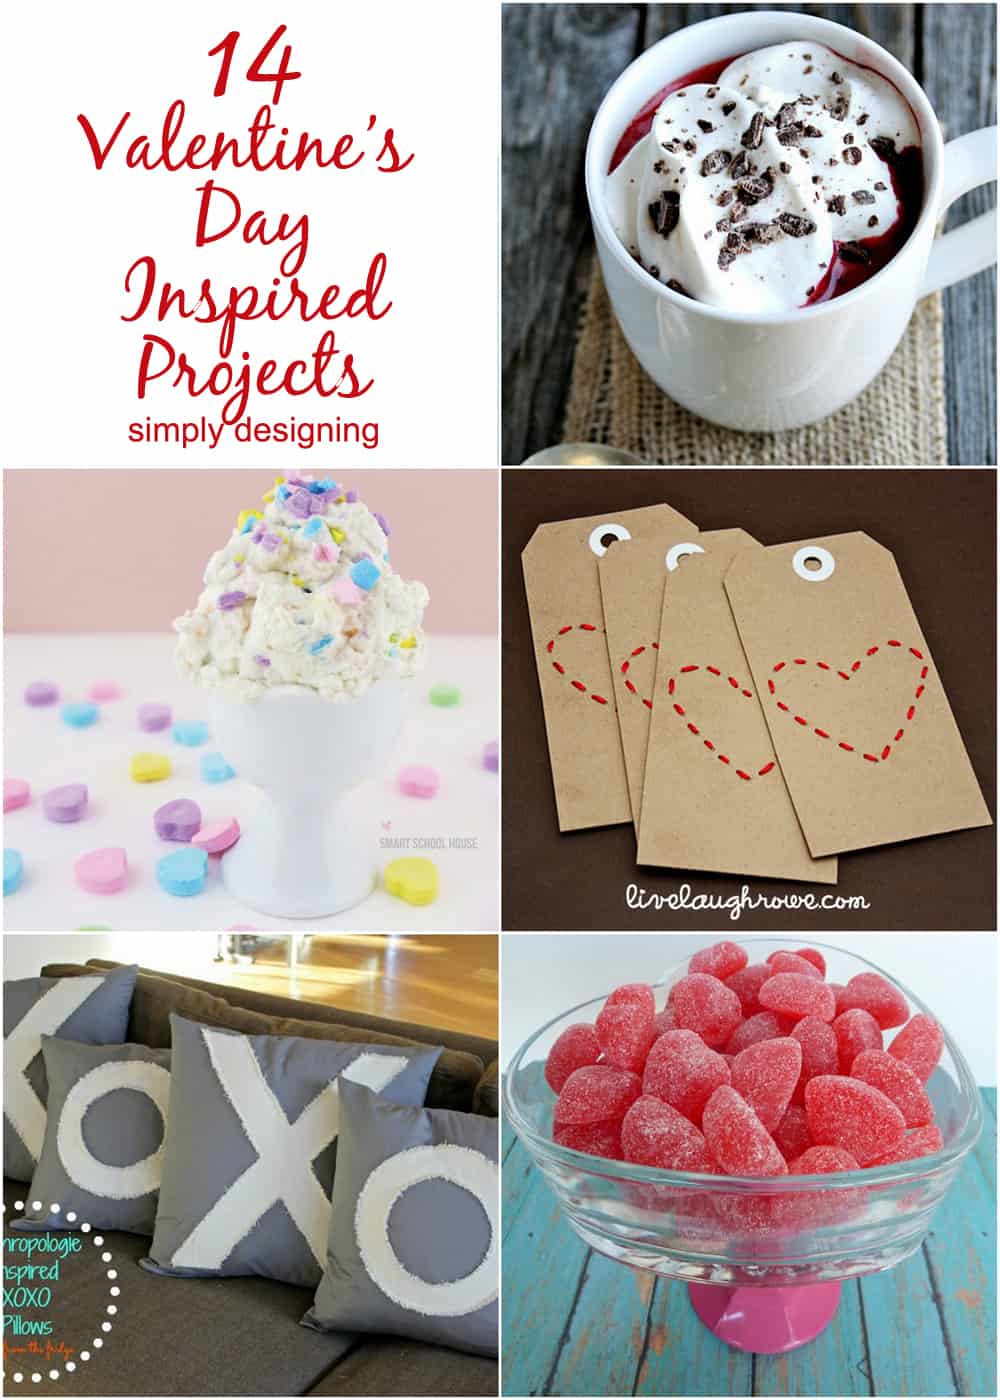 14+Valentines+Day+Inspired+Projects1 | 14 Valentine's Day Inspired Projects | 11 |